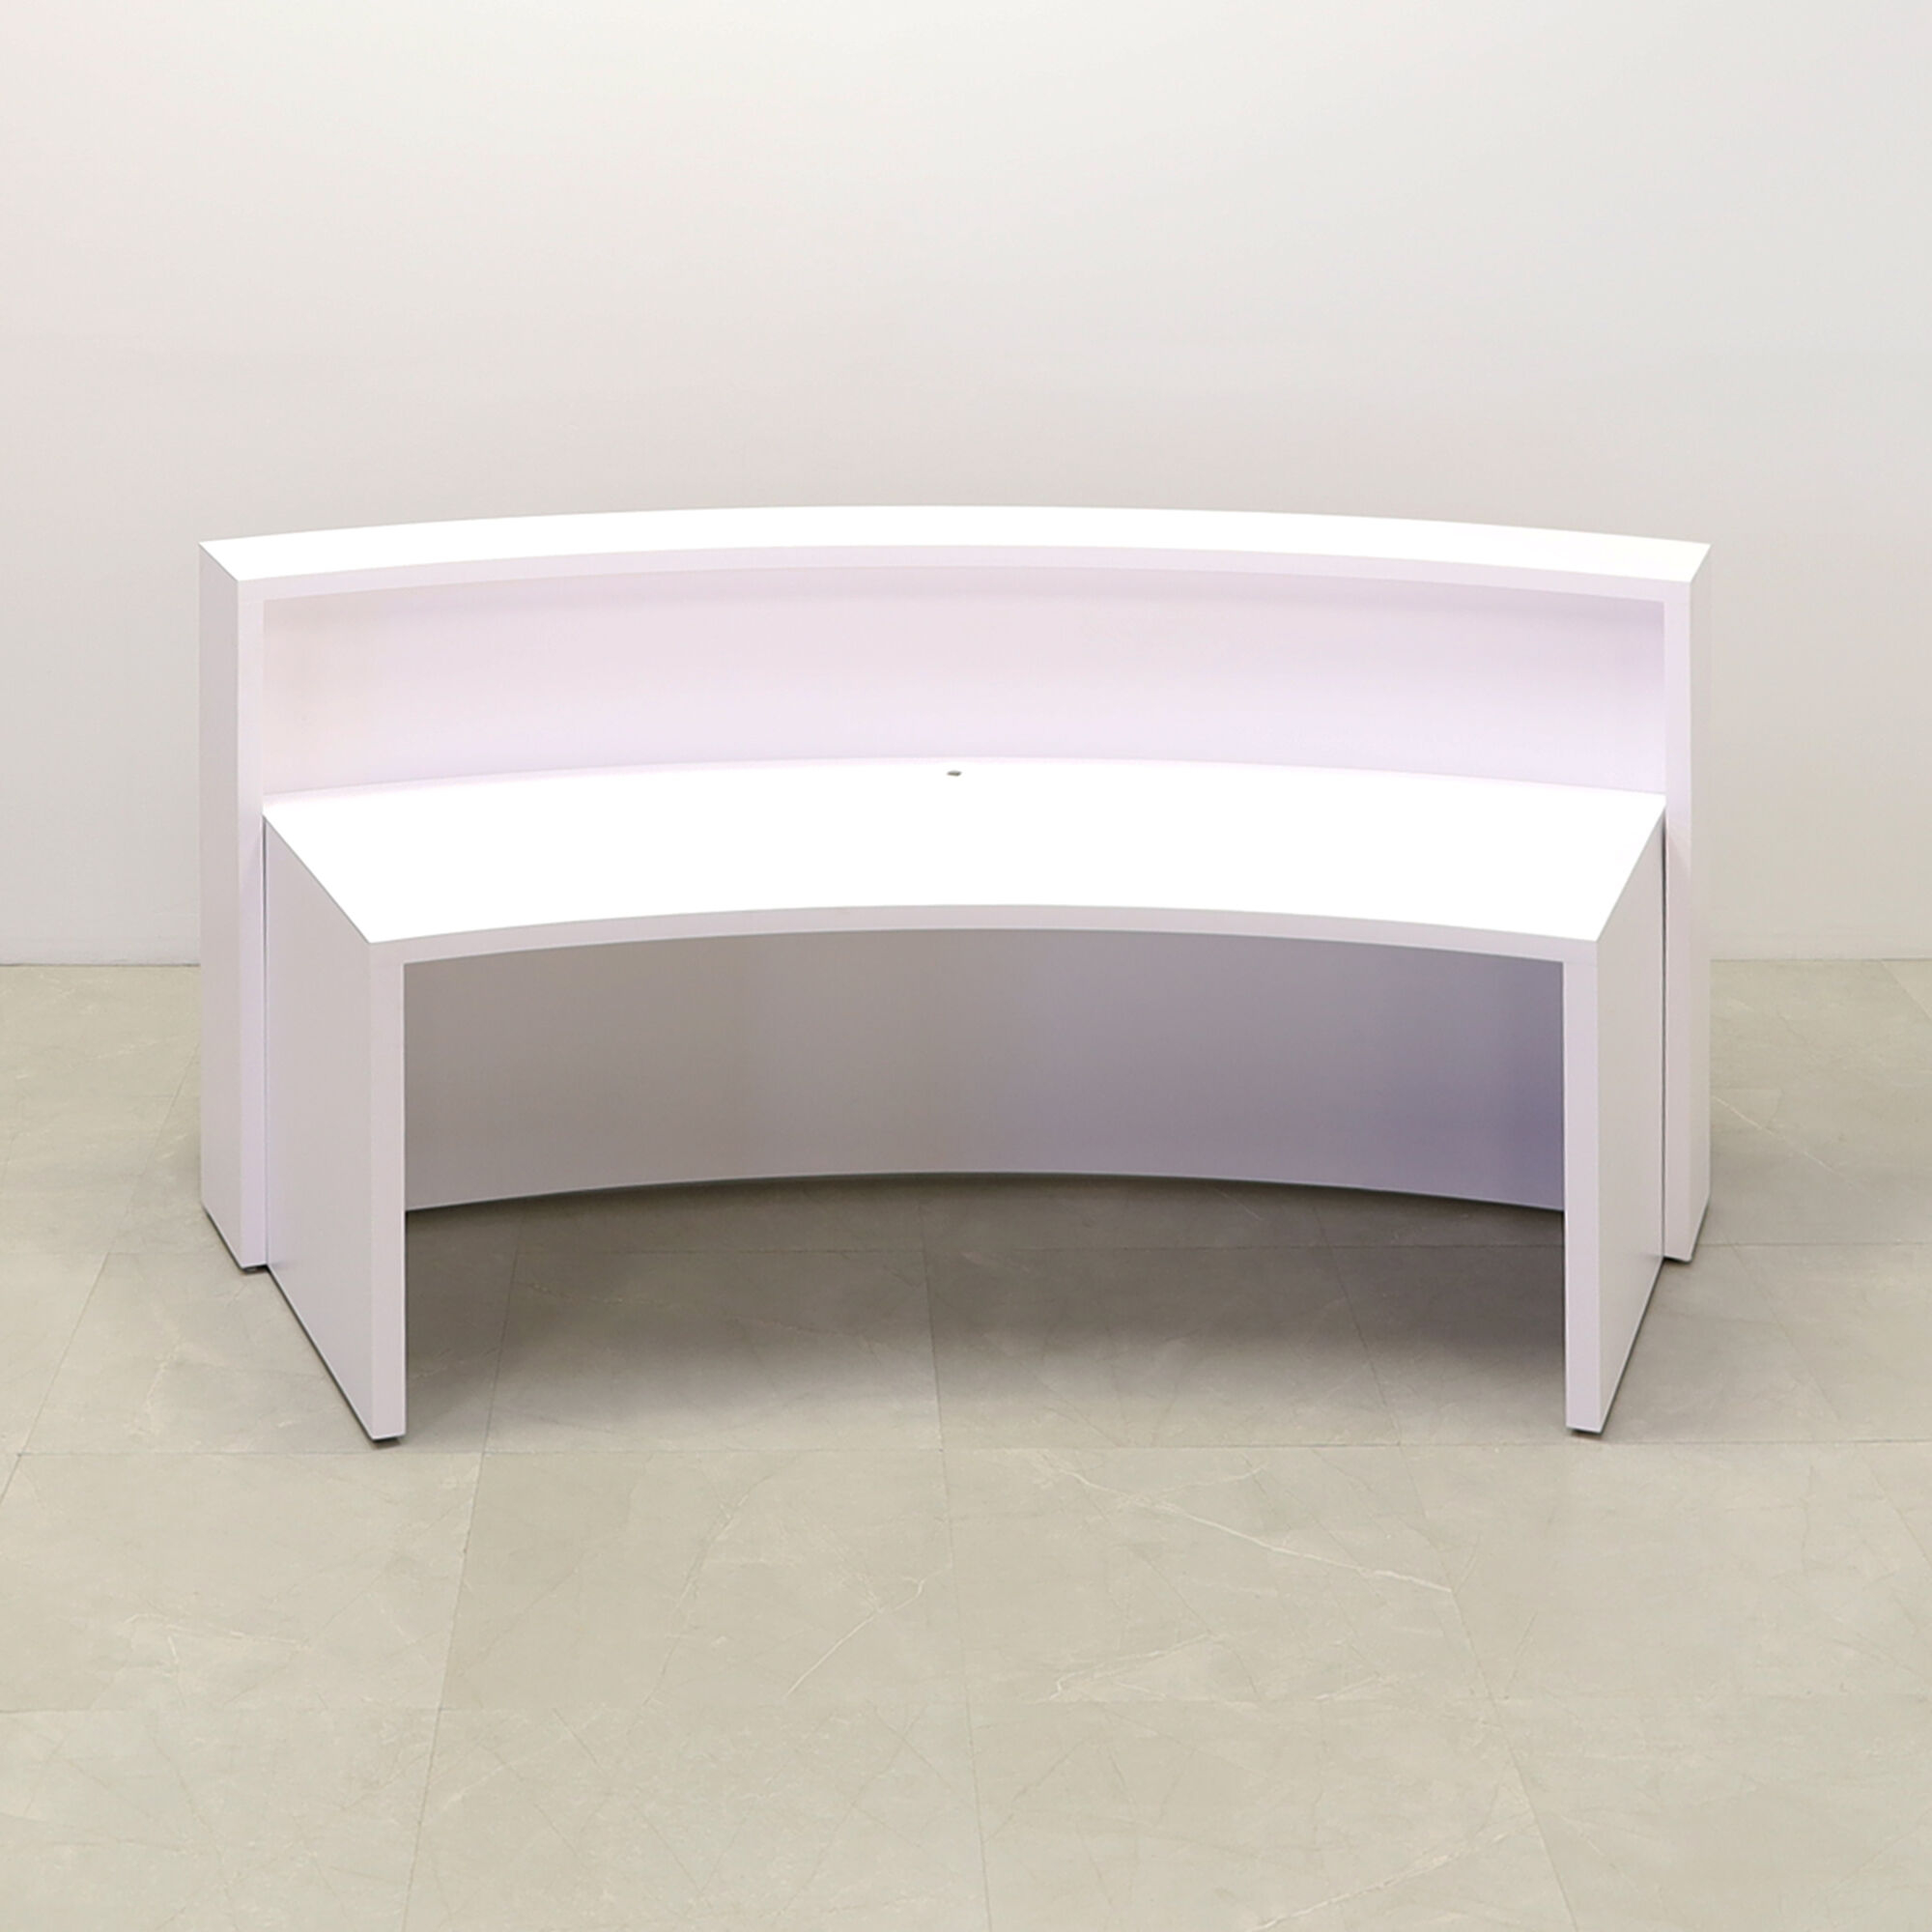 90-inch Seattle X1 Custom Reception Desk in white matte laminate desk, and hazel walnut matte laminate curved front panel, with multi-colored LED, shown here.